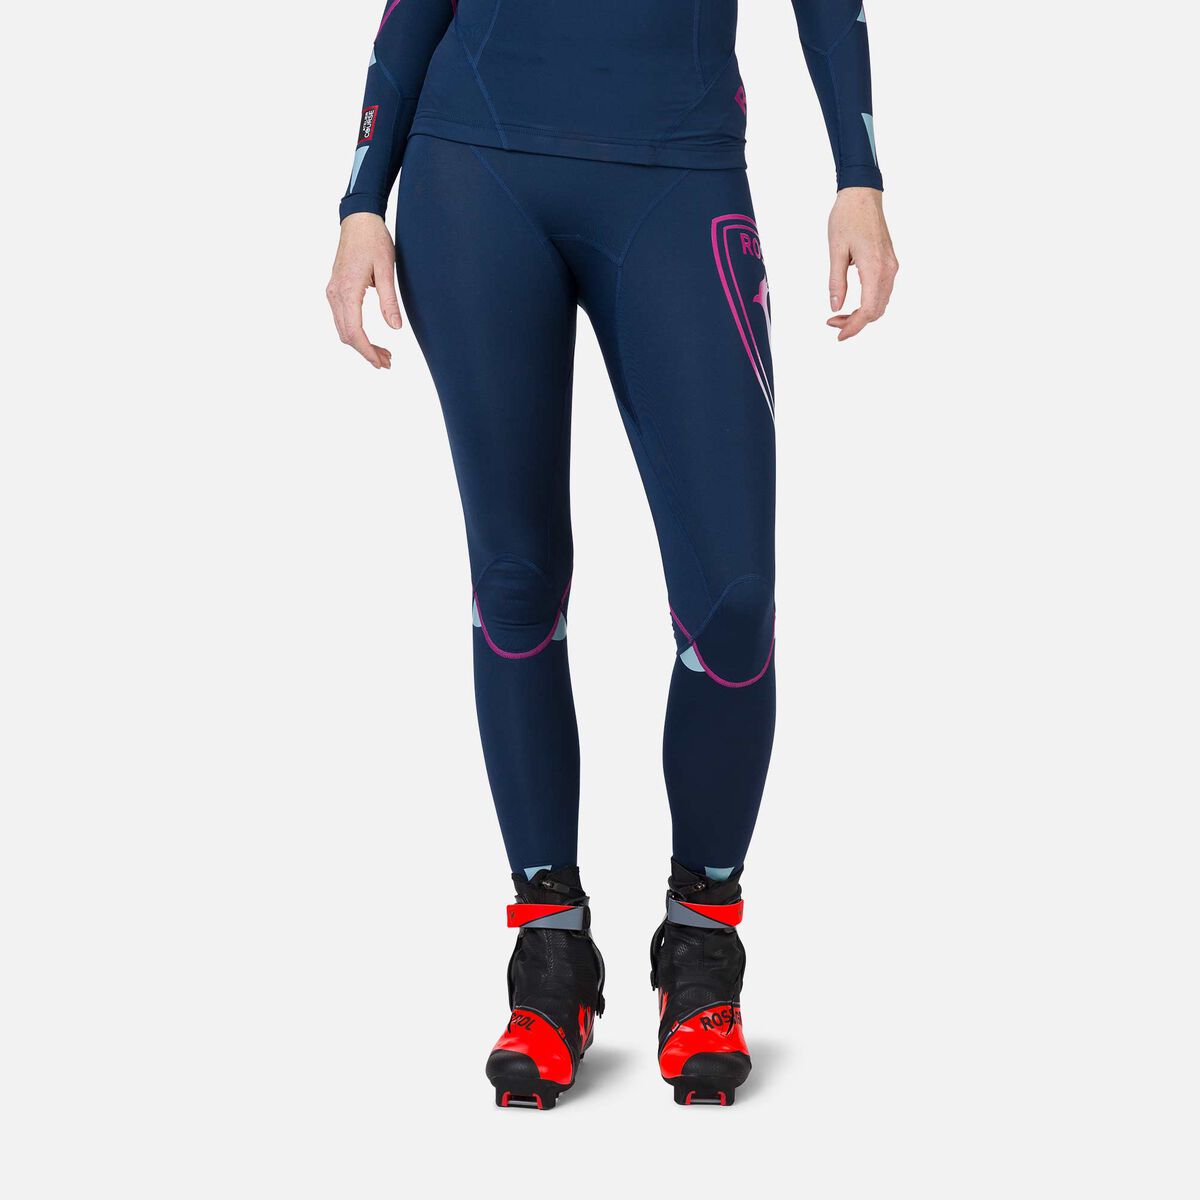 Infini Compression Race Base Layer Tights in Women average savings